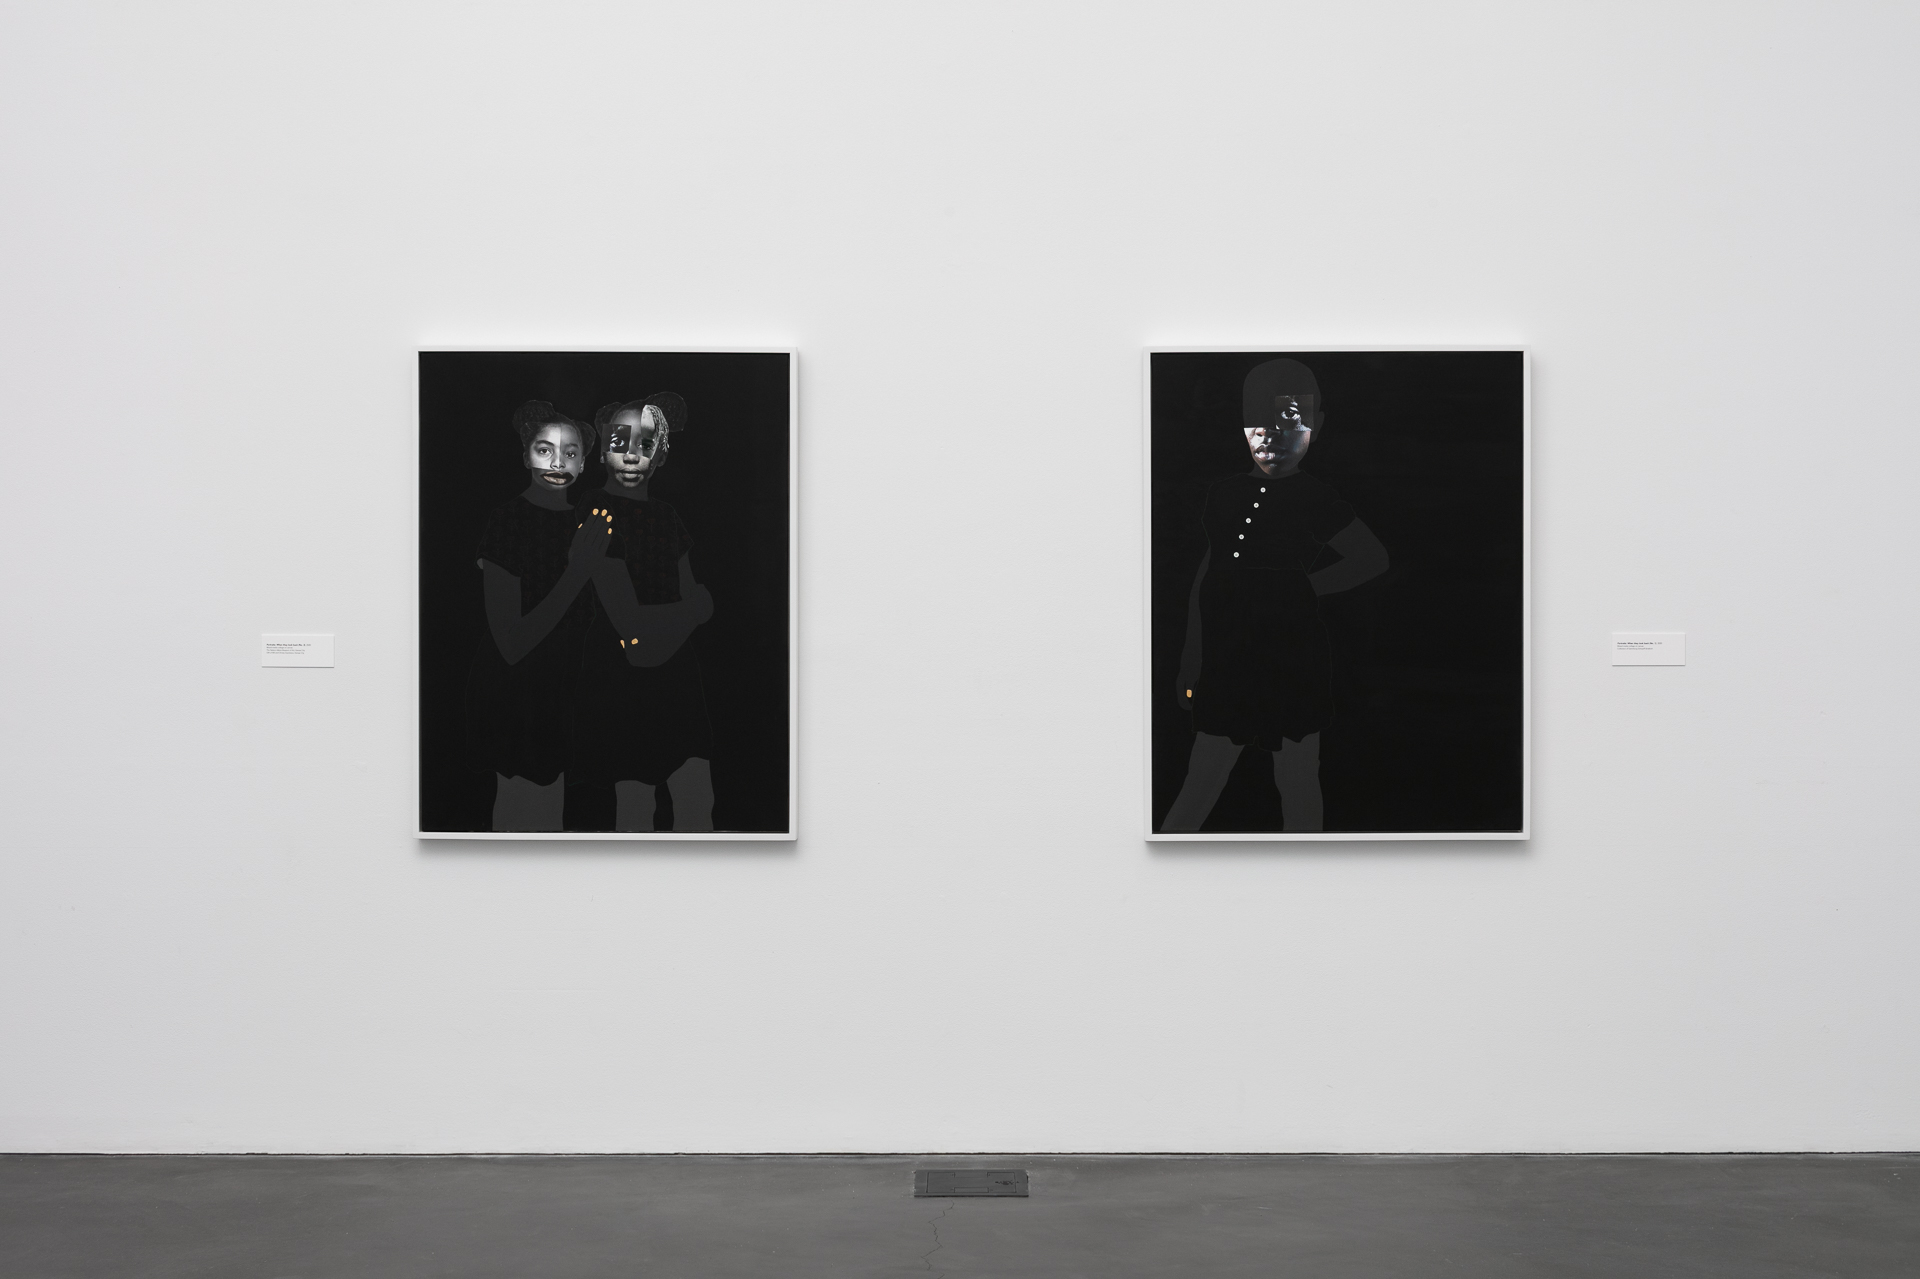 [Image description: A photo taken in the museum featuring two mostly black paintings hung on the wall side by side. The paintings feature black backgrounds with collages of young Black girls.]